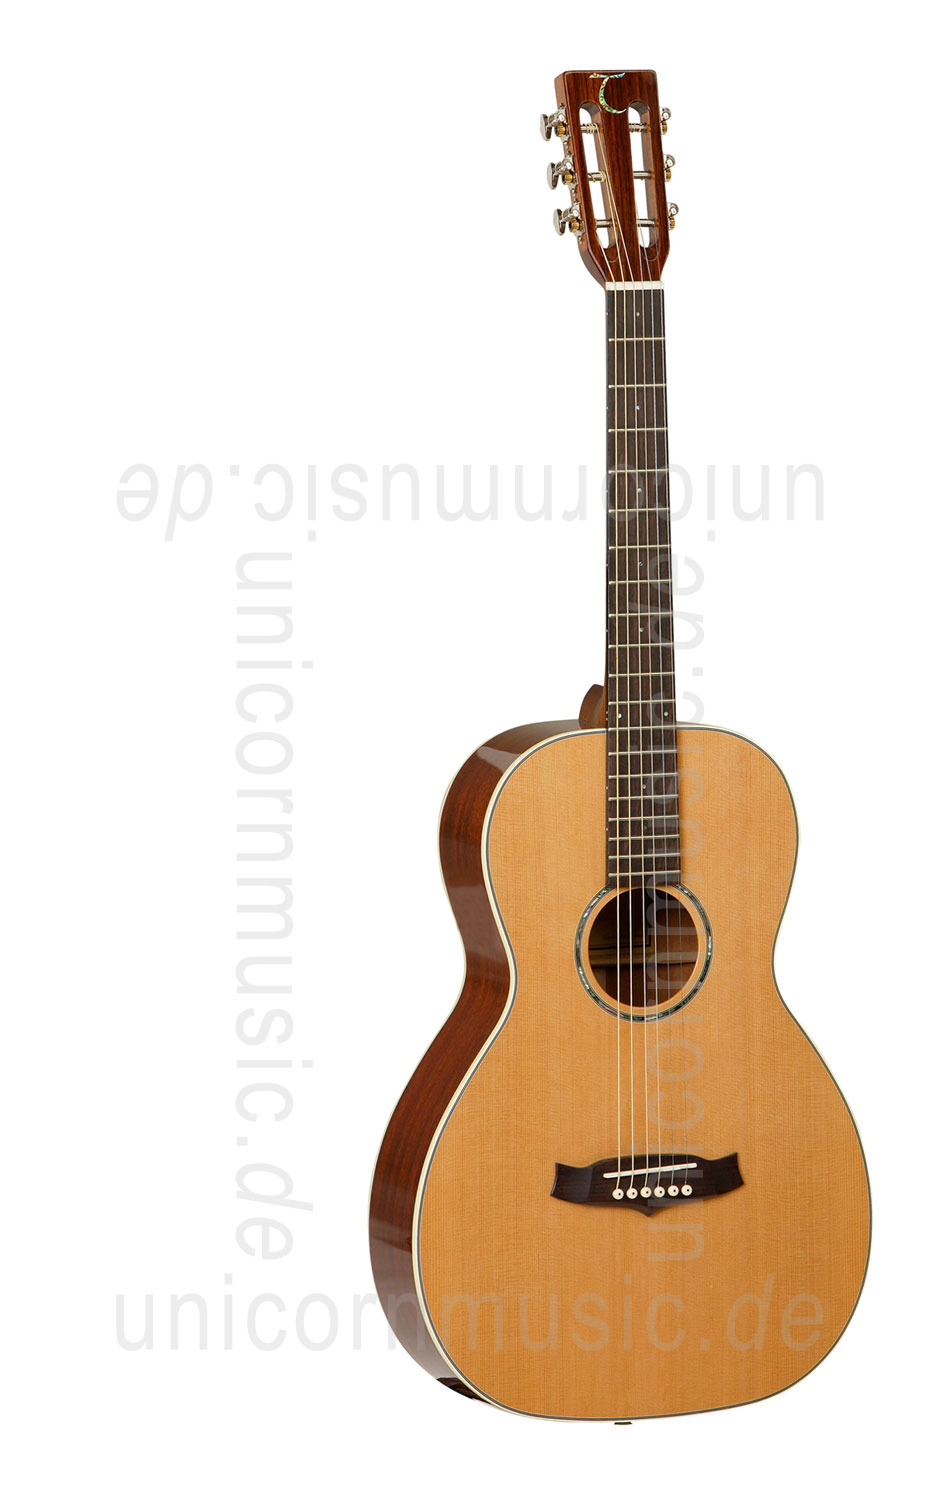 to article description / price Acoustic Guitar TANGLEWOOD TW73 PRO SPEC WIDE NECK - Parlour Style - Sundance Series - solid top + back